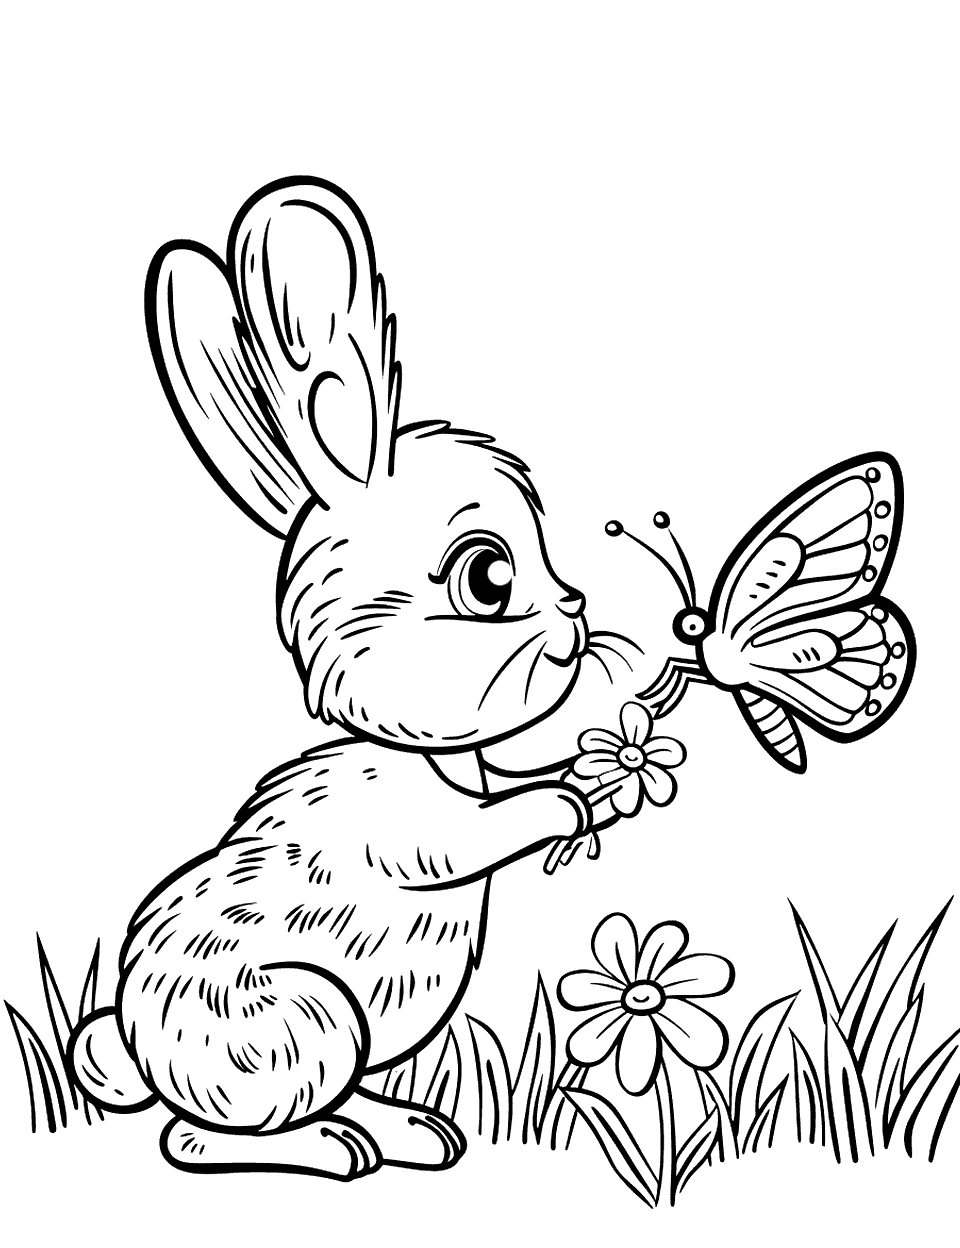 Bunny and the Butterfly Easter Coloring Page - A bunny reaching out to gently touch a butterfly landing on a nearby flower.